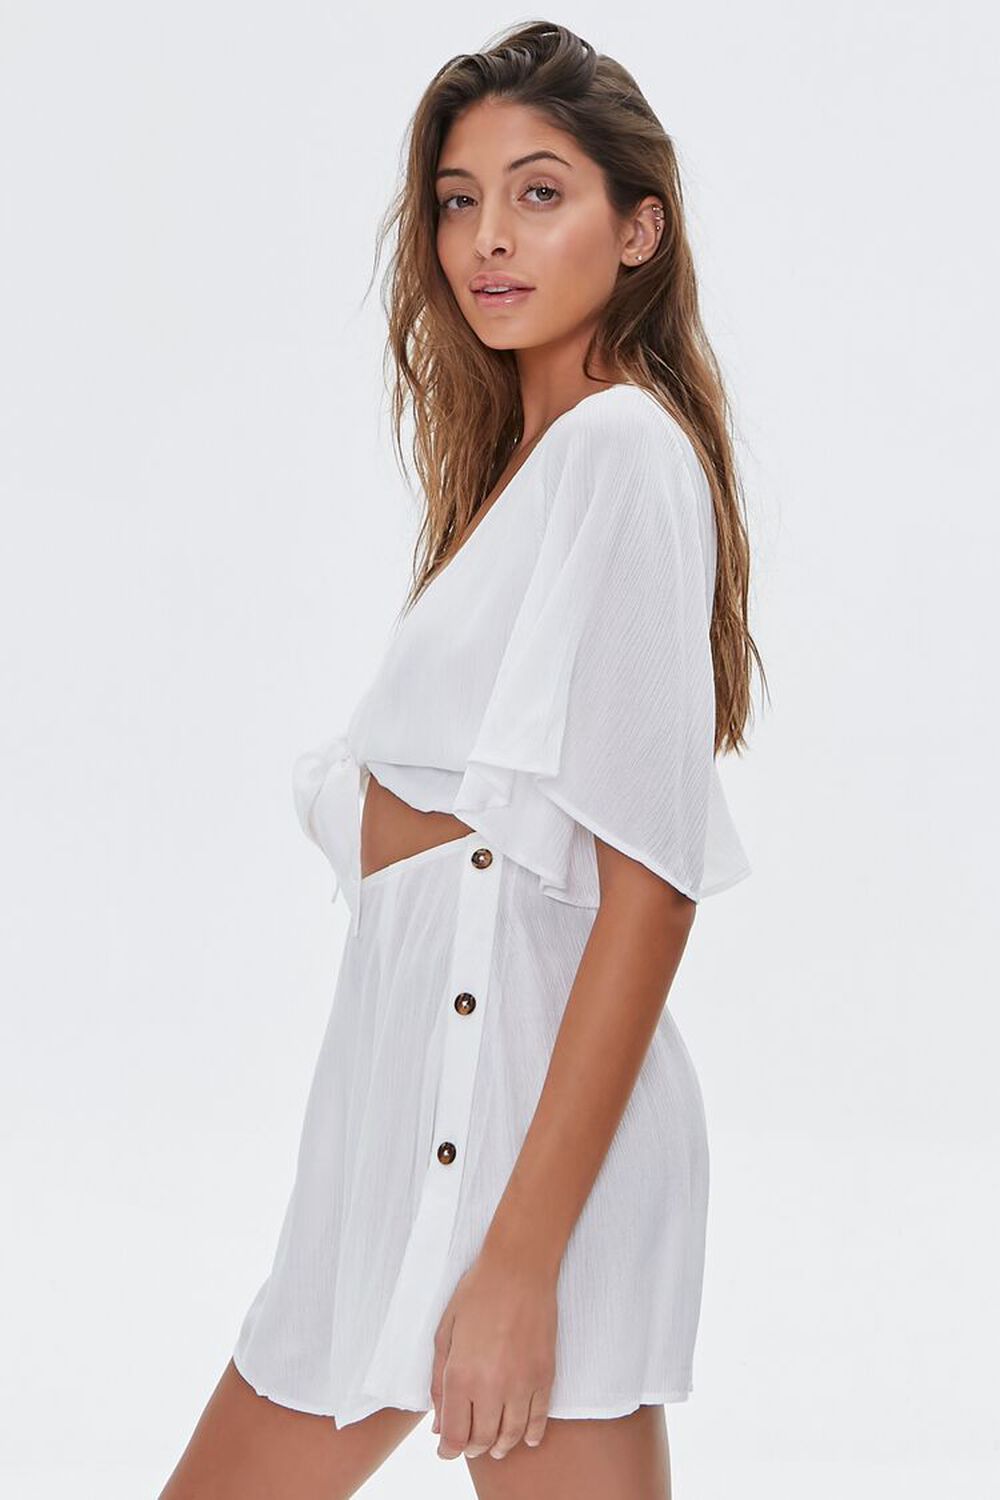 WHITE Tie-Front Swim Cover-Up Dress, image 2